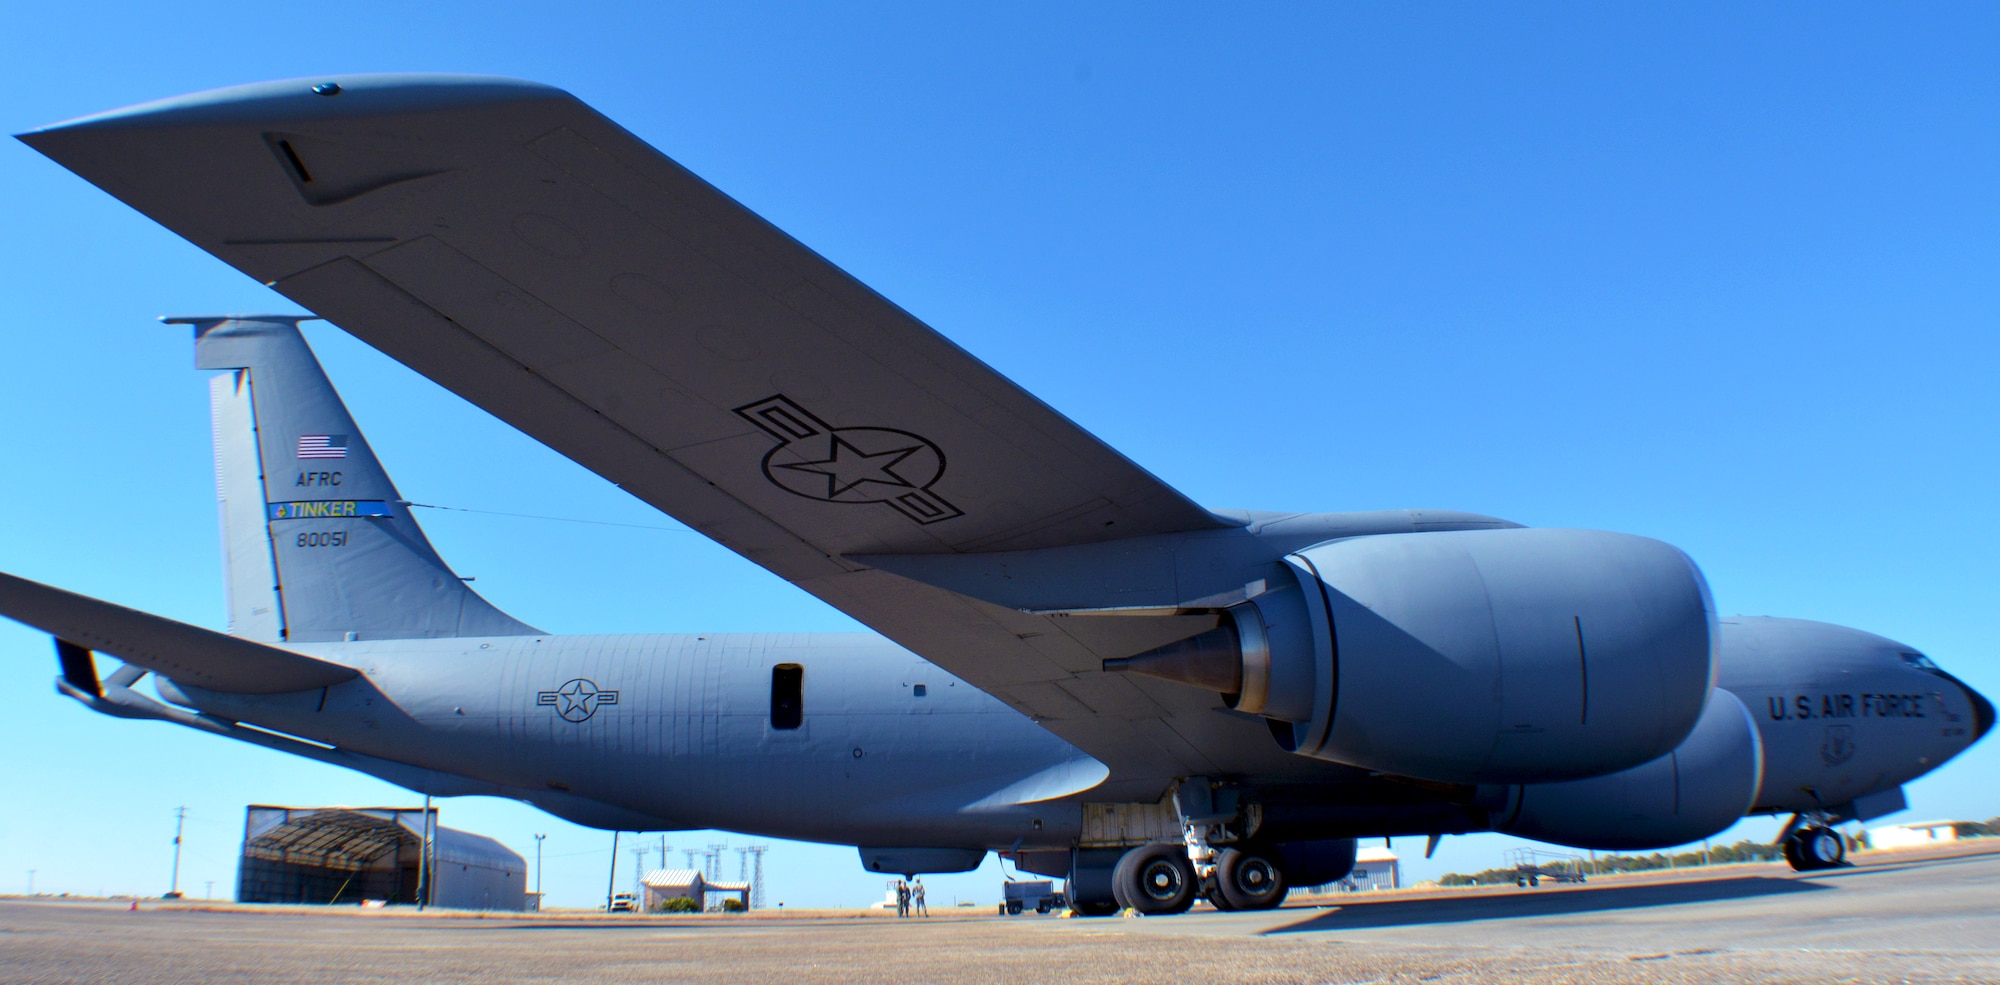 A 507th Air Refueling Wing KC-135R Stratotanker from Tinker Air Force Base, Okla., sits on the flight line at Eglin Air Force Base, Fla., while a maintenance crew prepares it for flight Nov. 28, 2017. This particular aircraft has been reconfigured to use the Large Aircraft Infrared Countermeasures system, which is designed to deflect incoming missiles. (U.S. Air Force photo/Tech. Sgt. Samantha Mathison)